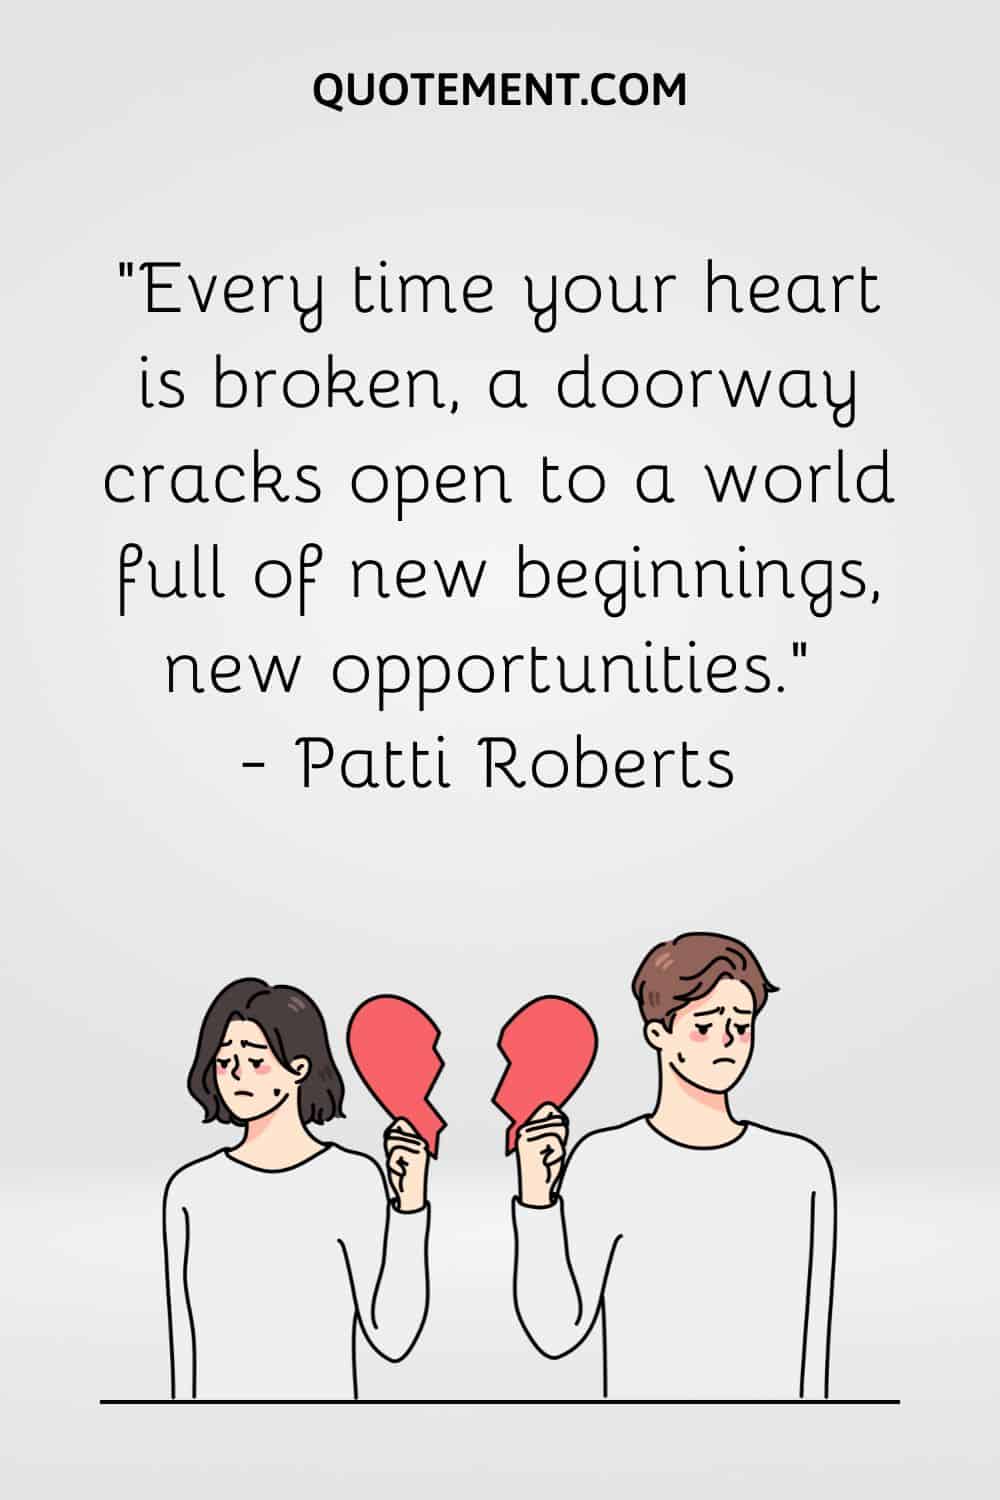 Every time your heart is broken, a doorway cracks open to a world full of new beginnings, new opportunities